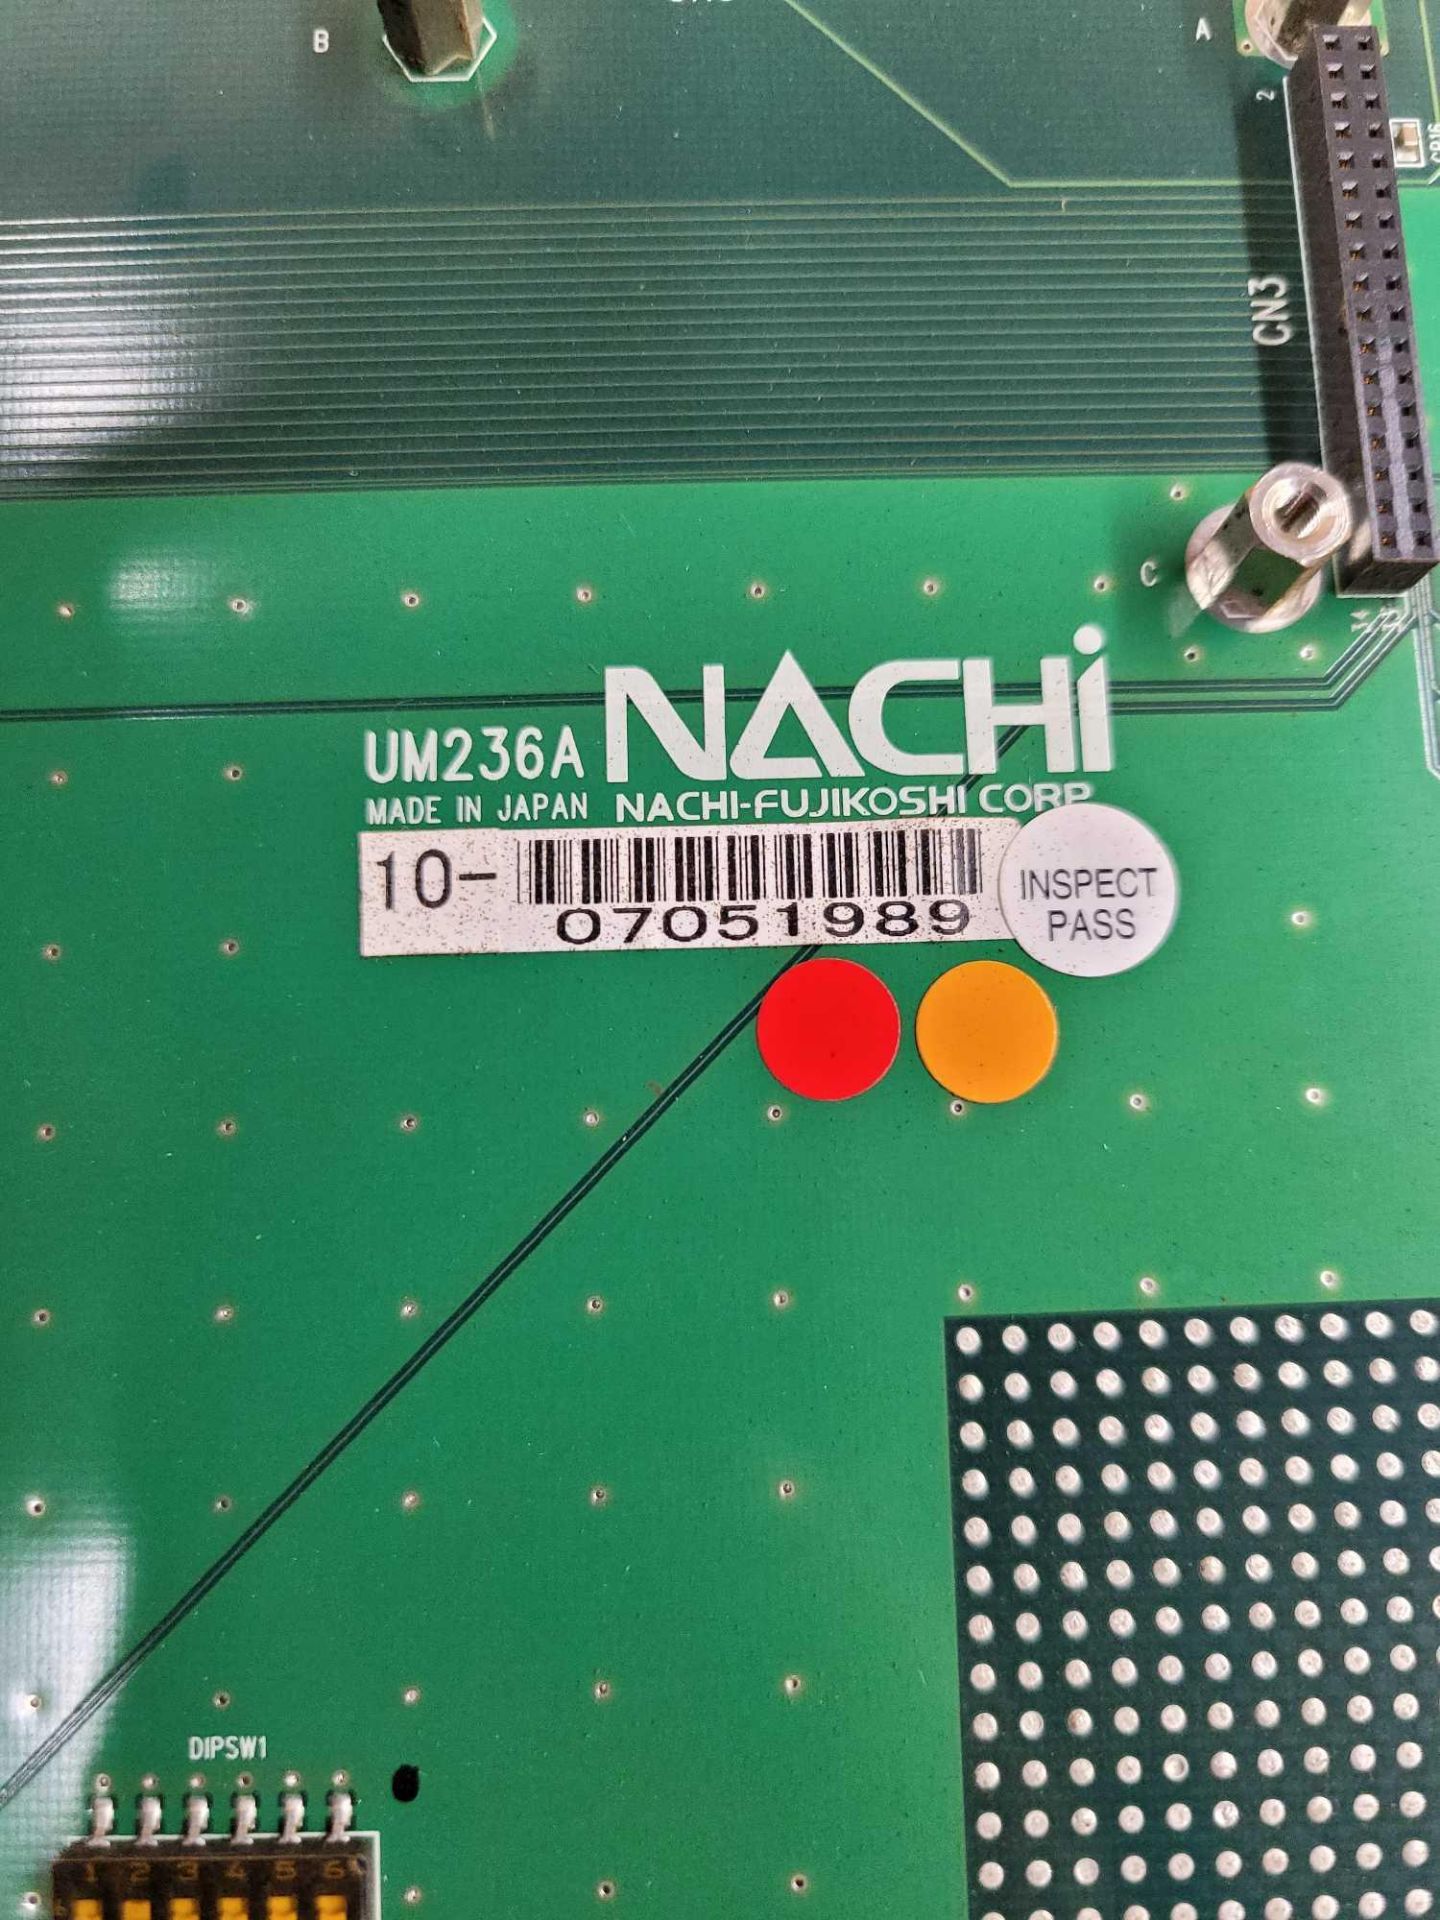 NACHI UM236A / PCB Board Card  /  Lot Weight: 0.6 lbs - Image 3 of 5